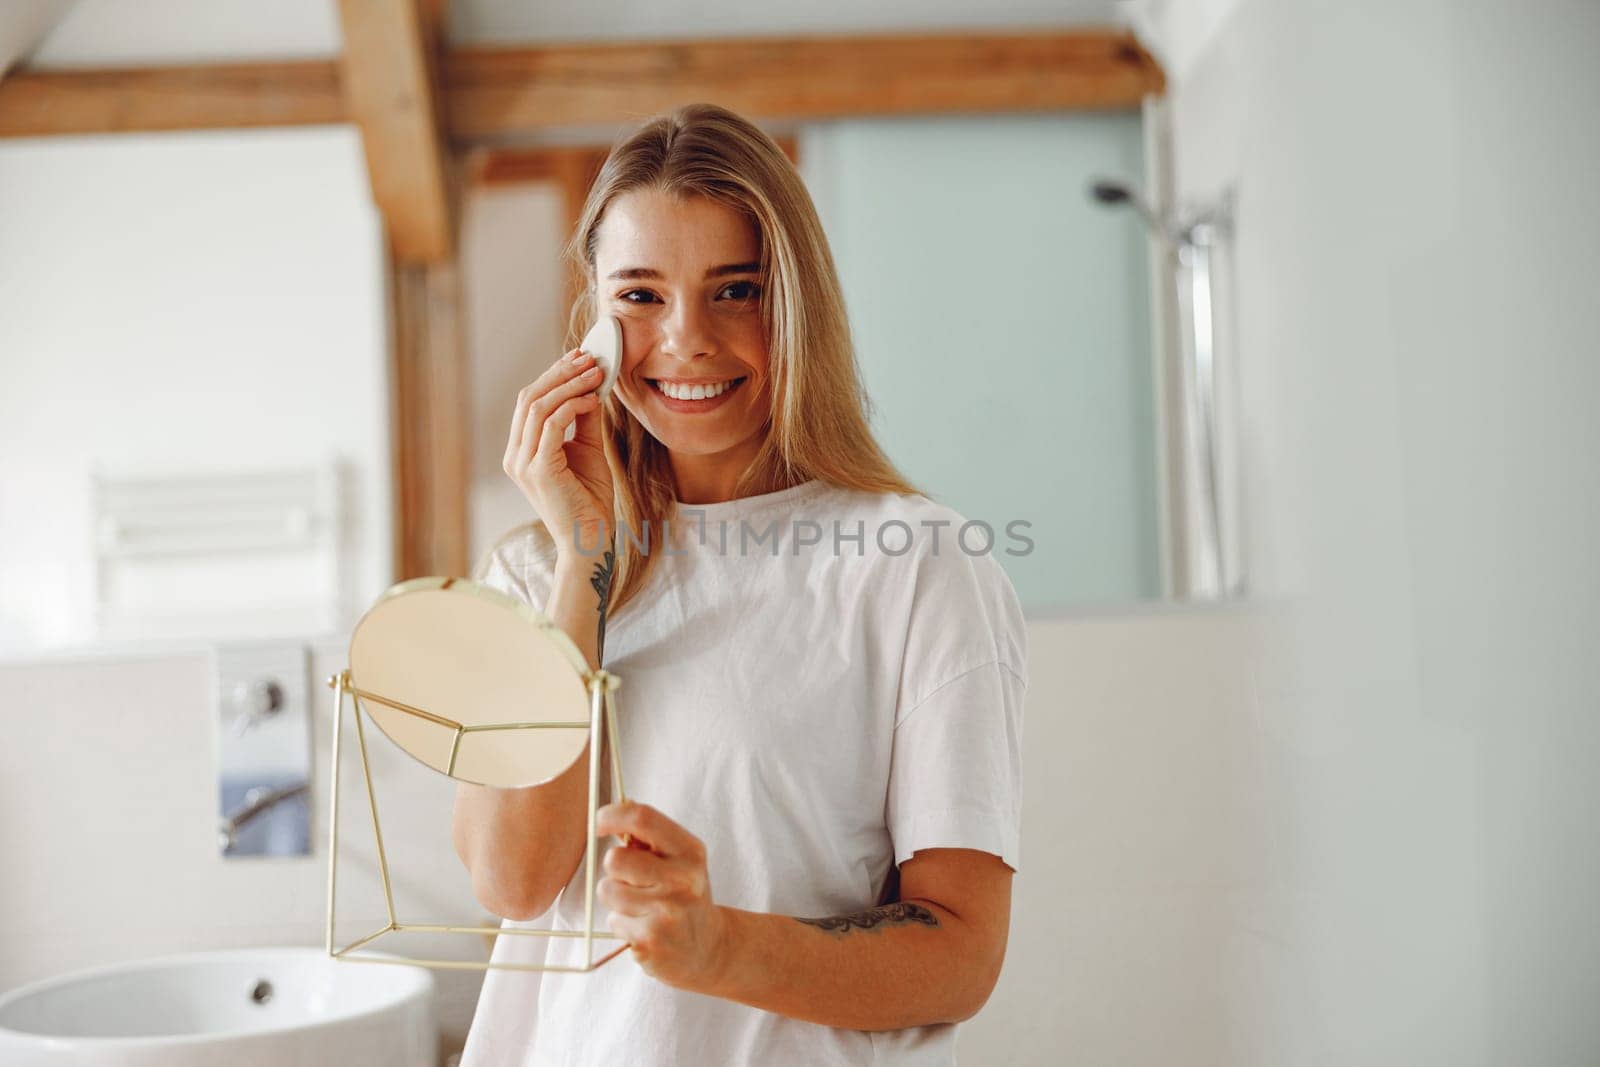 Young woman removing makeup with cotton pad in front of mirror standing in bathroom